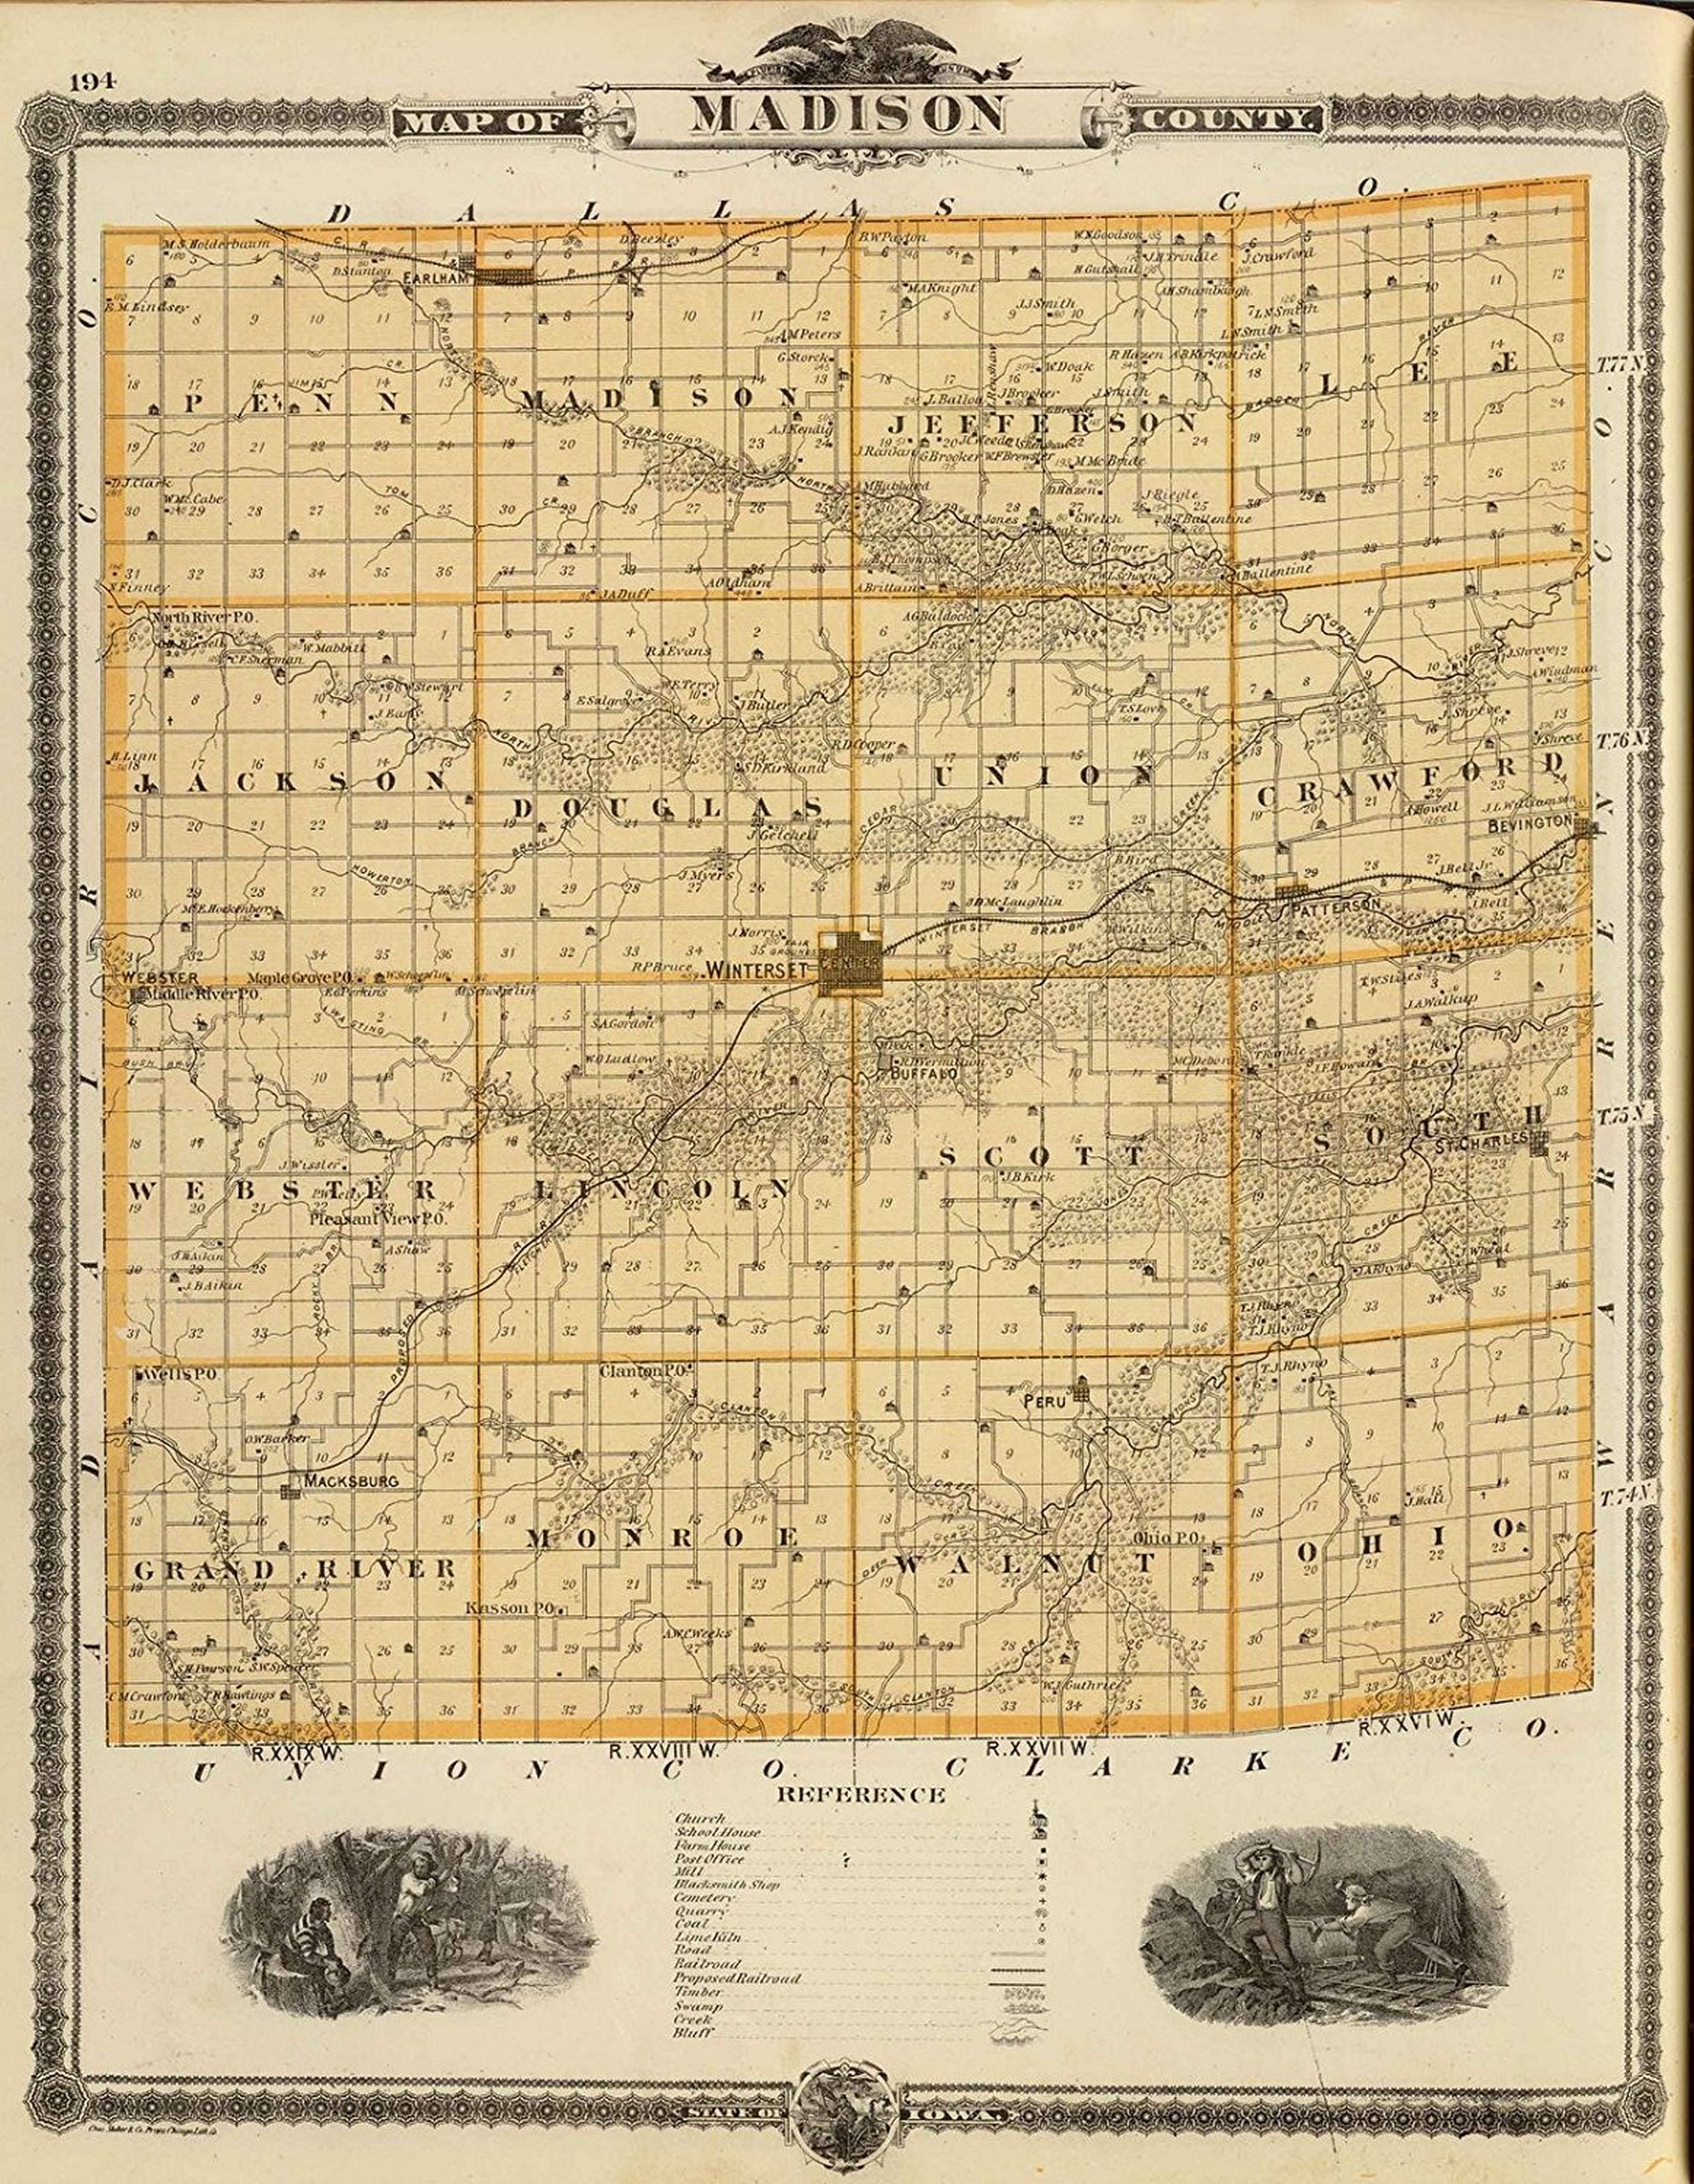 Map of Madison County, State of Iowa. Chas. Shober and Co., props., Chicago Lith. Co. (Published by the Andreas Atlas Co., Lakeside Building, Chicago, Ills. Engraved and printed by Chas. Shober and Co., Props. of Chicago Lithographing Co.), A.T. Andreas'